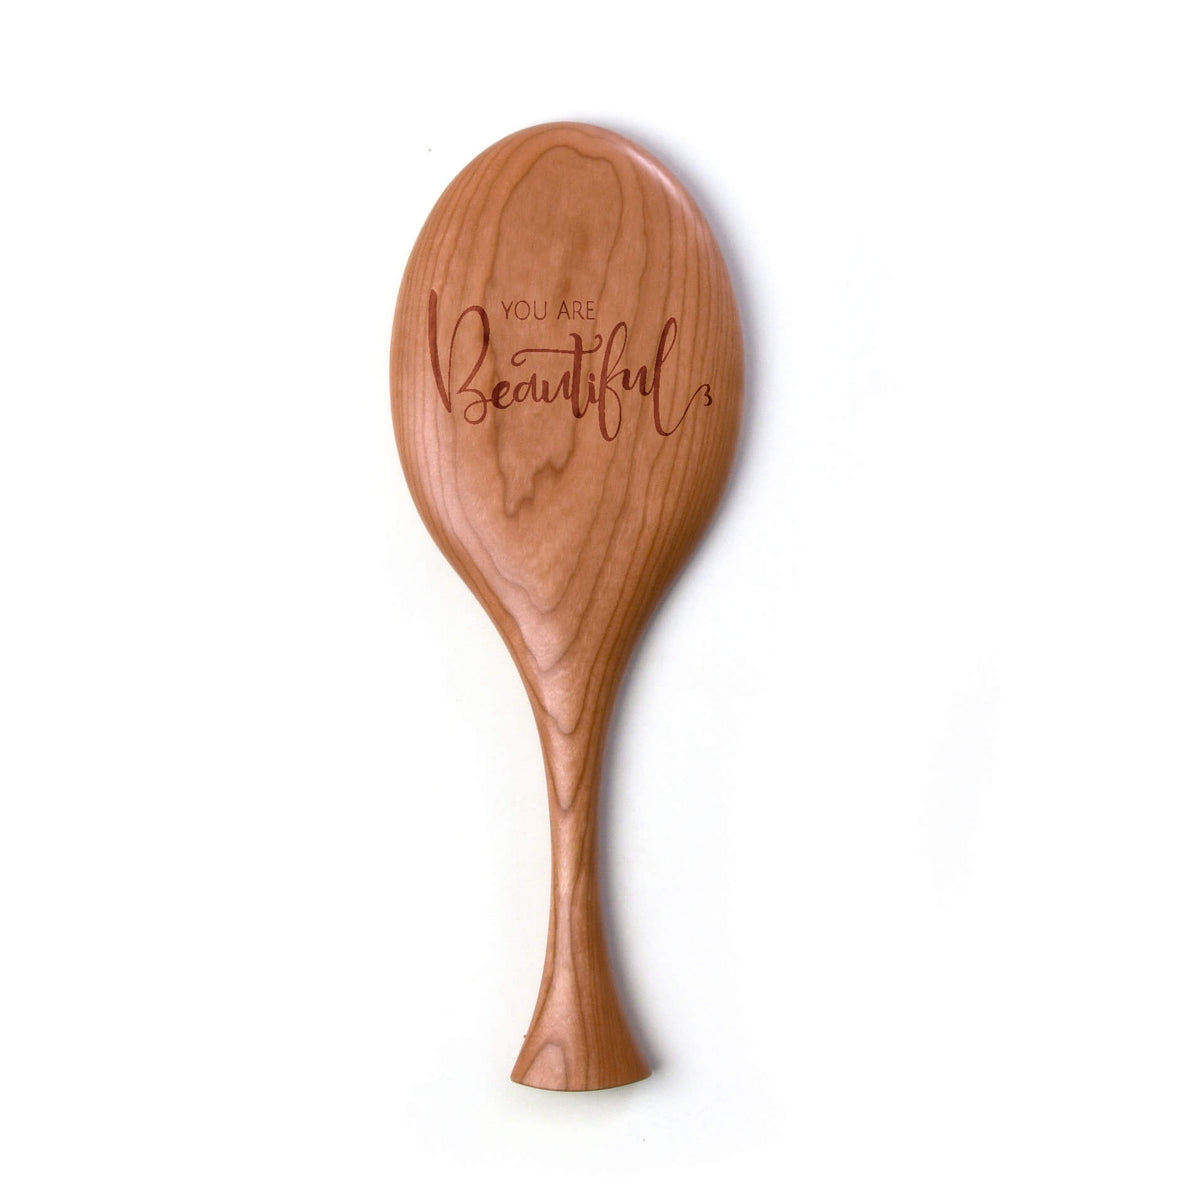 Wooden Hand Mirror - Words with Boards, LLC